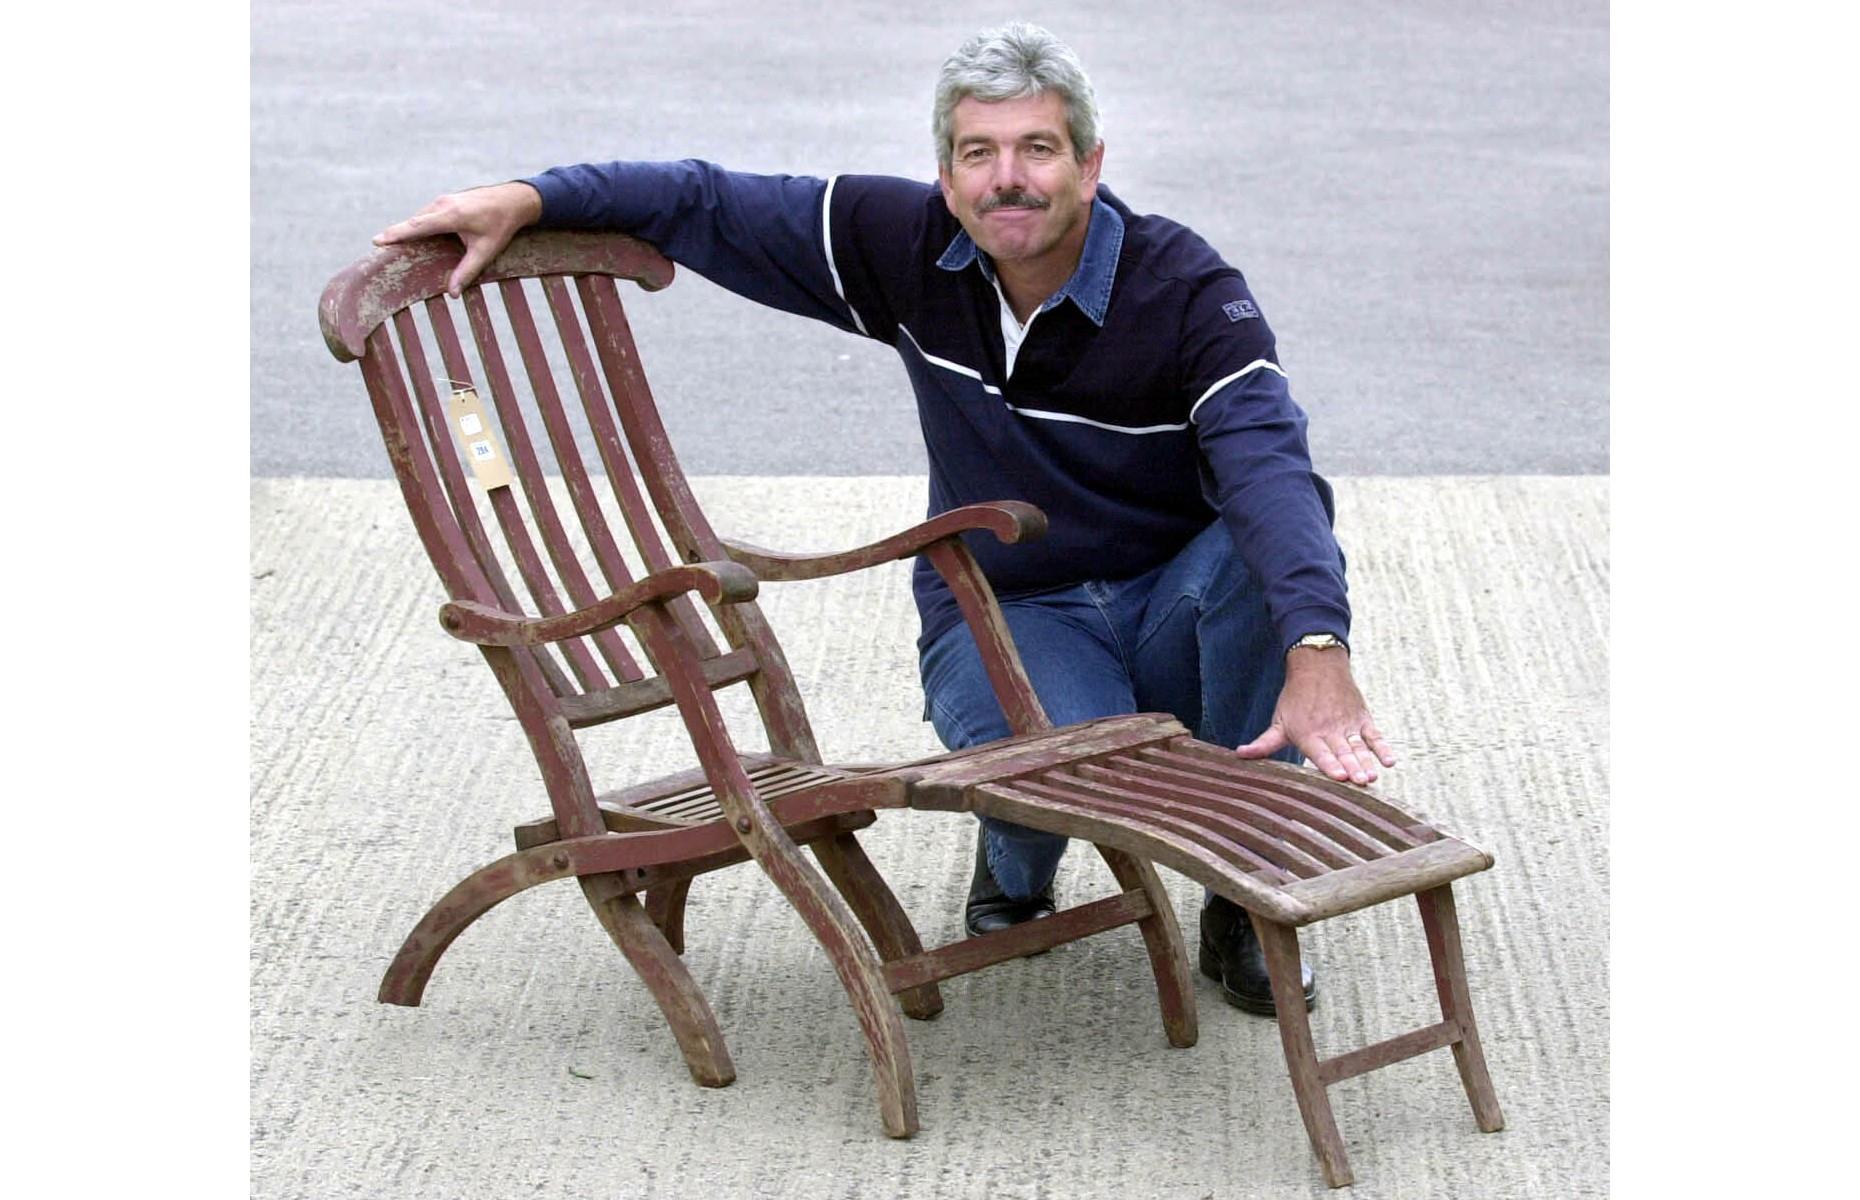 <p>Furniture branded with the White Star Line emblem has become popular among those who collect Titanic memorabilia. In 2001, Chris Lowe from Swindon, England spent £30,000 ($43.5k) on this mahogany deckchair. It is believed to be one of around 50 thrown overboard as crew members dumped furniture in the hope it would help the ship stay afloat. This was far from the most valuable of the discarded pieces though, and in 2015 a deckchair found floating on the surface of the Atlantic sold for just over £100,000 ($154k) in Wiltshire, England. The chair had been collected by crew on the Mackay-Bennett rescue ship as they were recovering the bodies of victims in the aftermath of the crisis.</p>